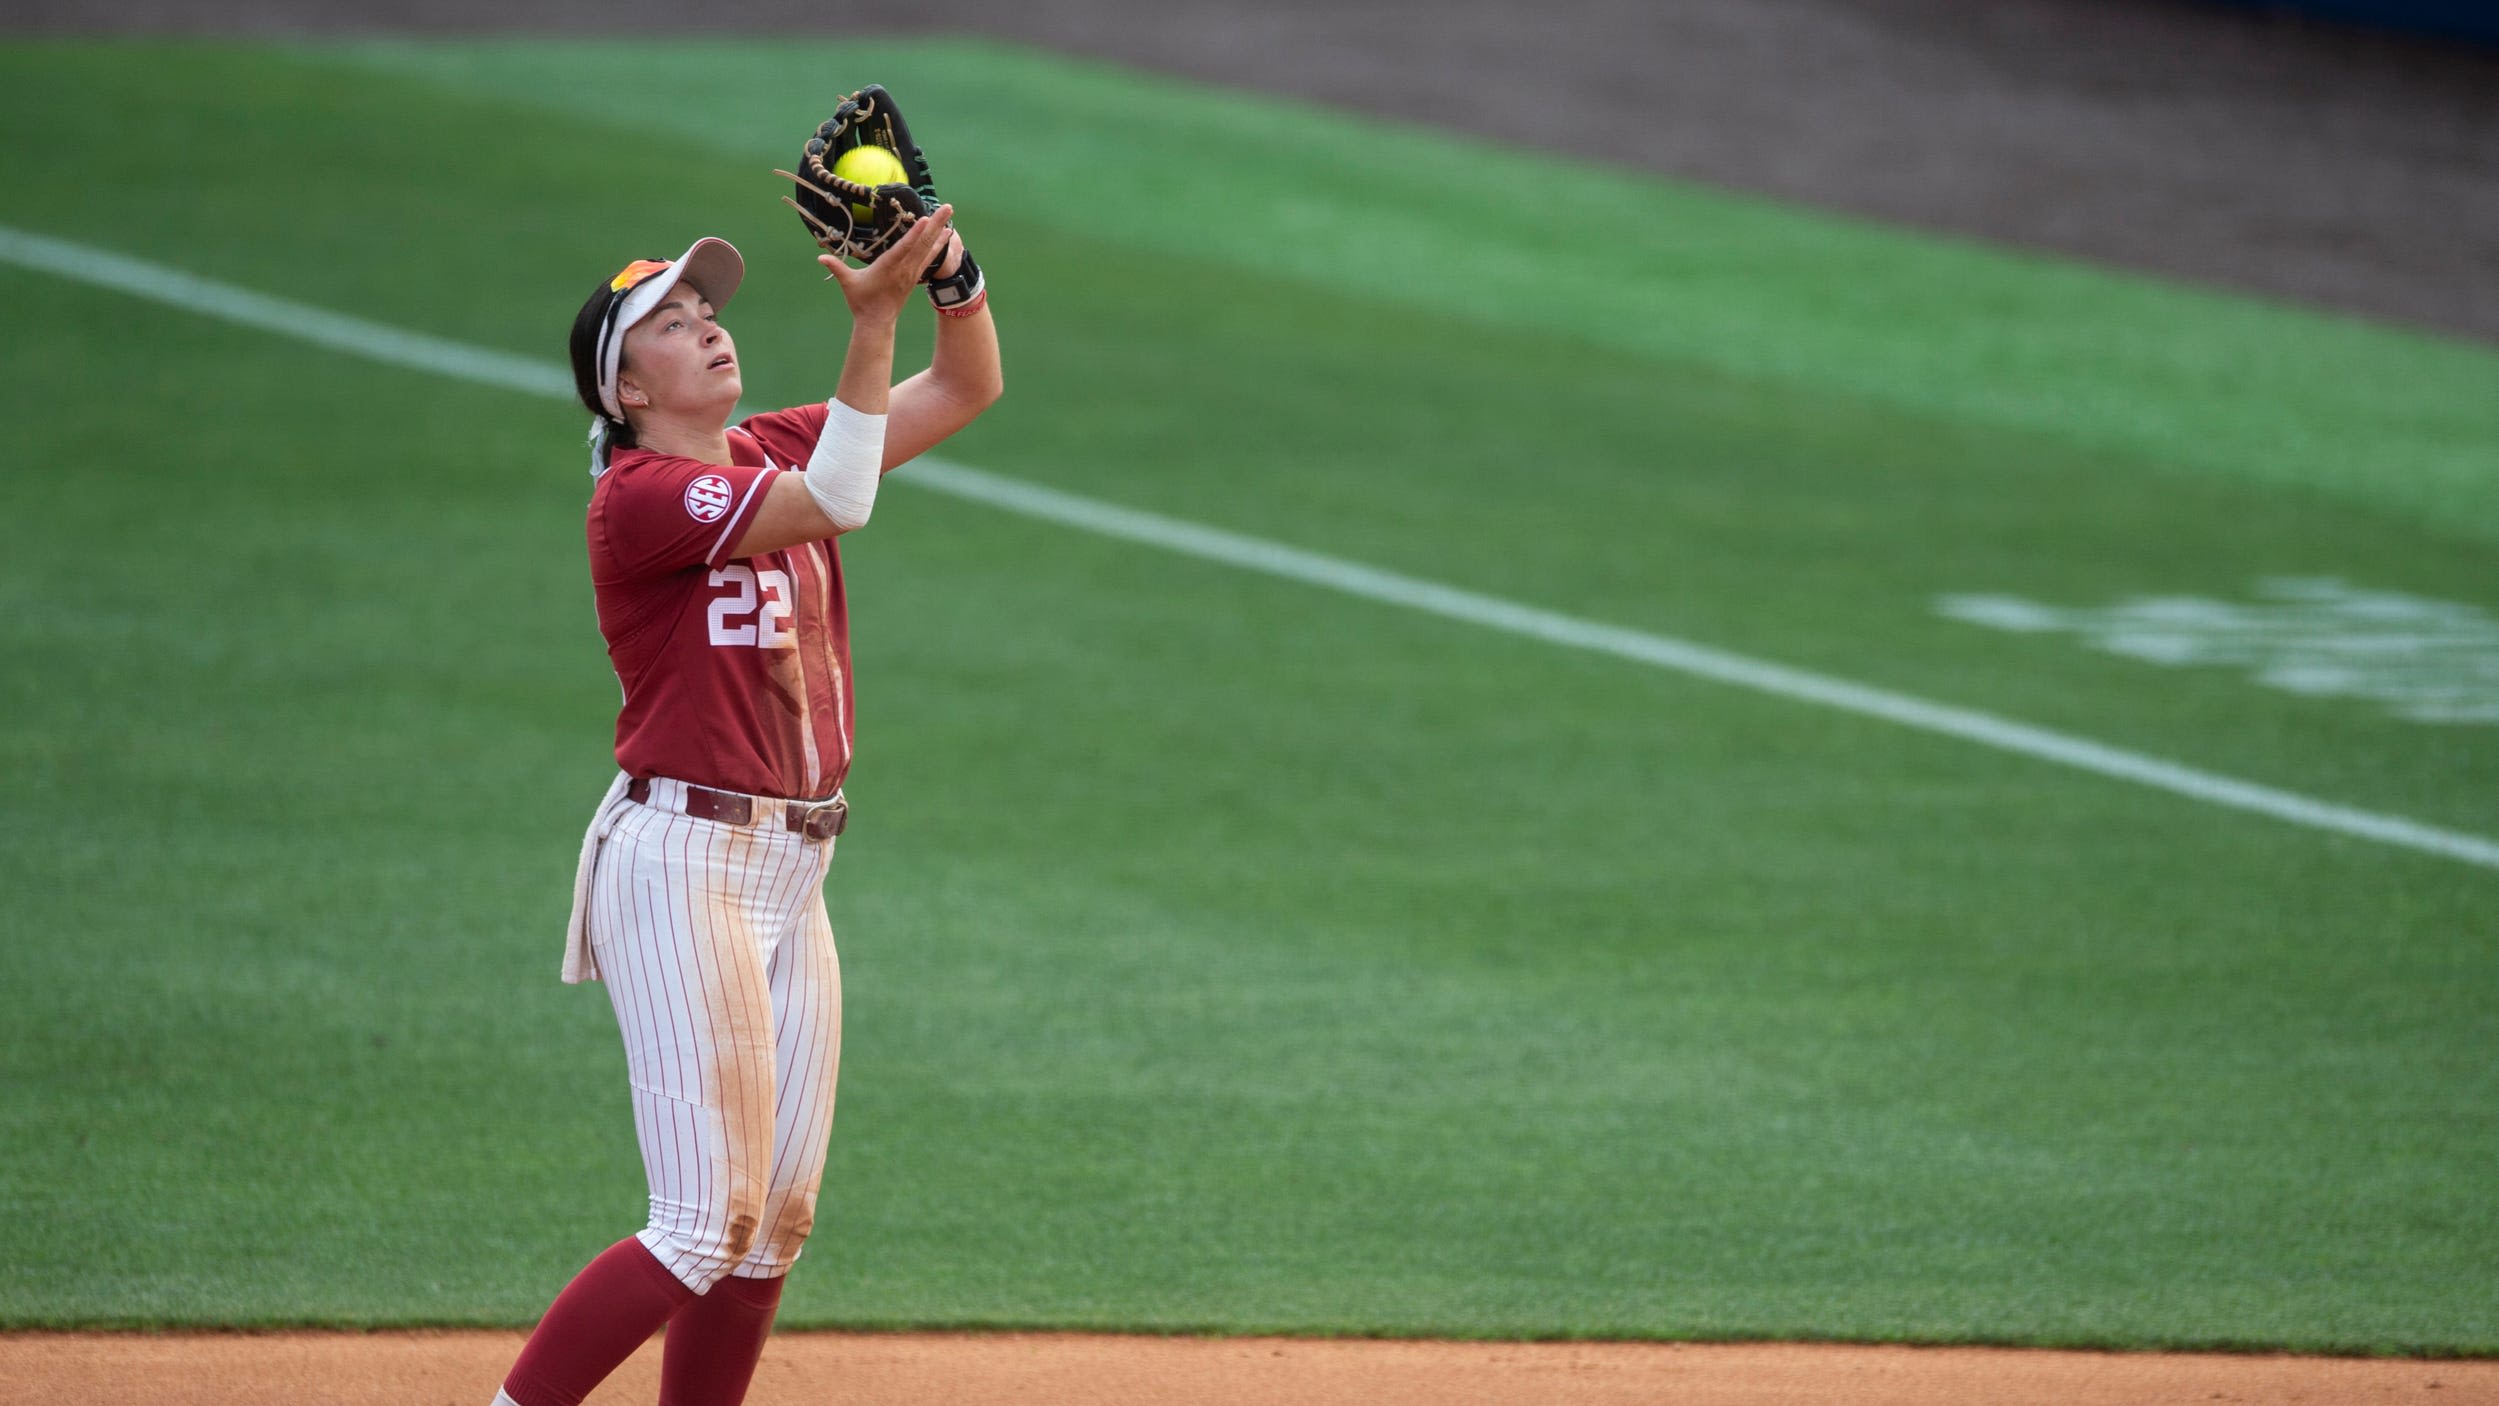 What to know about the Tuscaloosa NCAA softball regional: Schedule, parking, TV